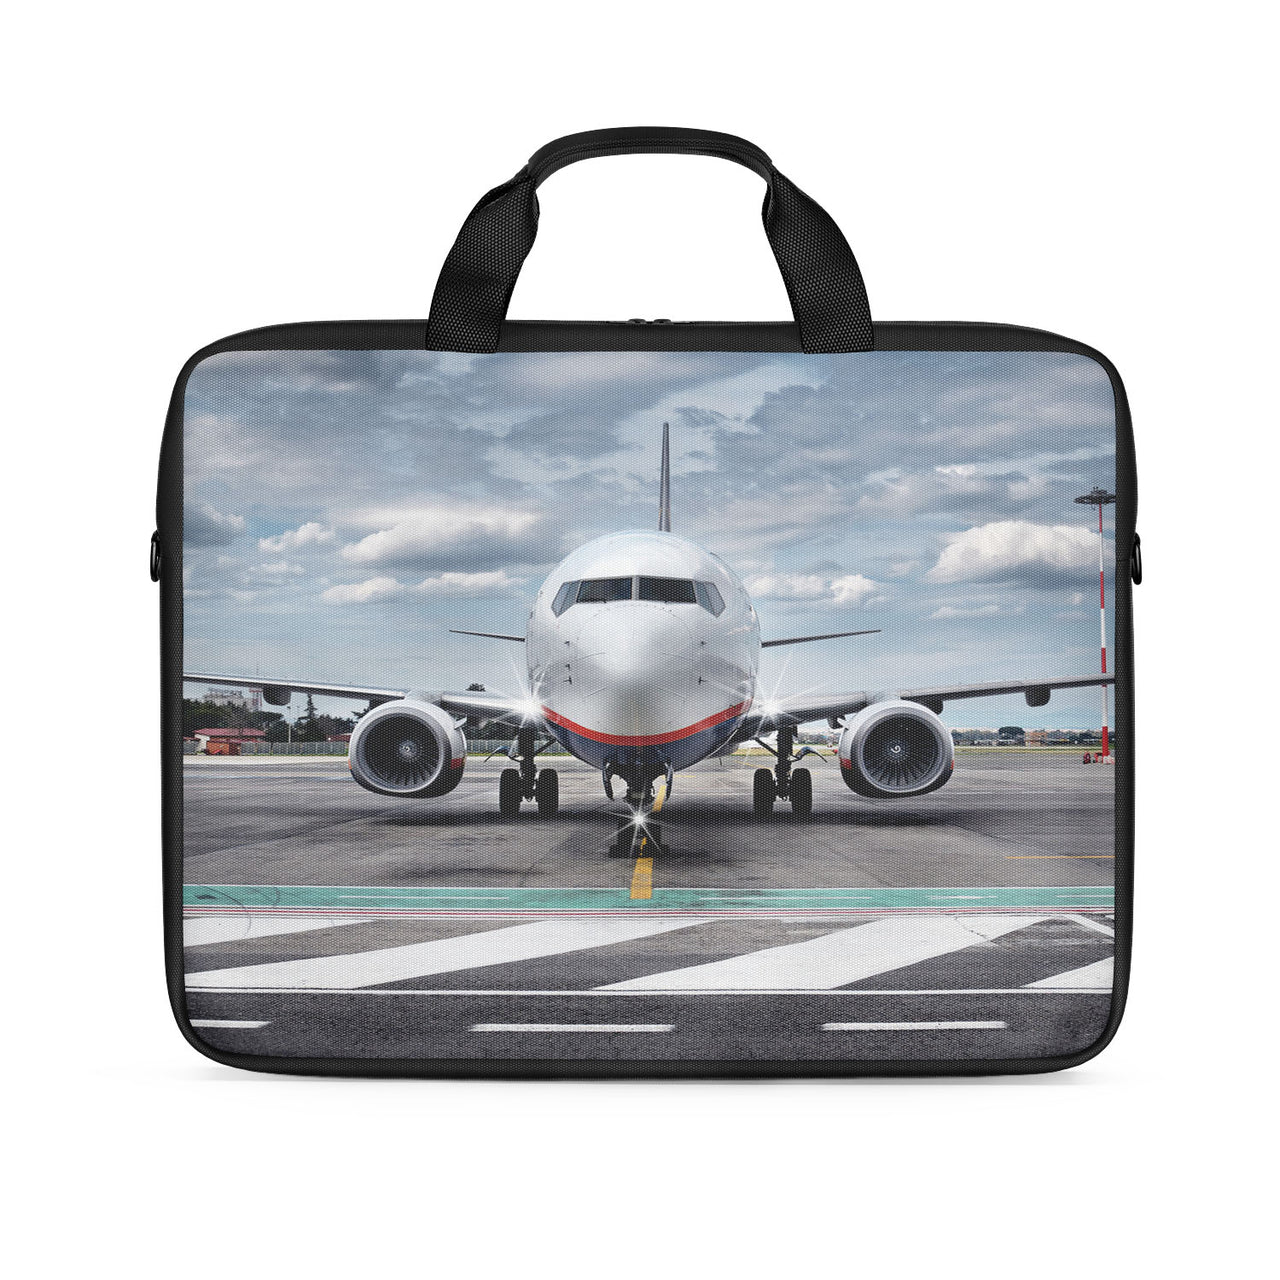 Amazing Clouds and Boeing 737 NG Designed Laptop & Tablet Bags